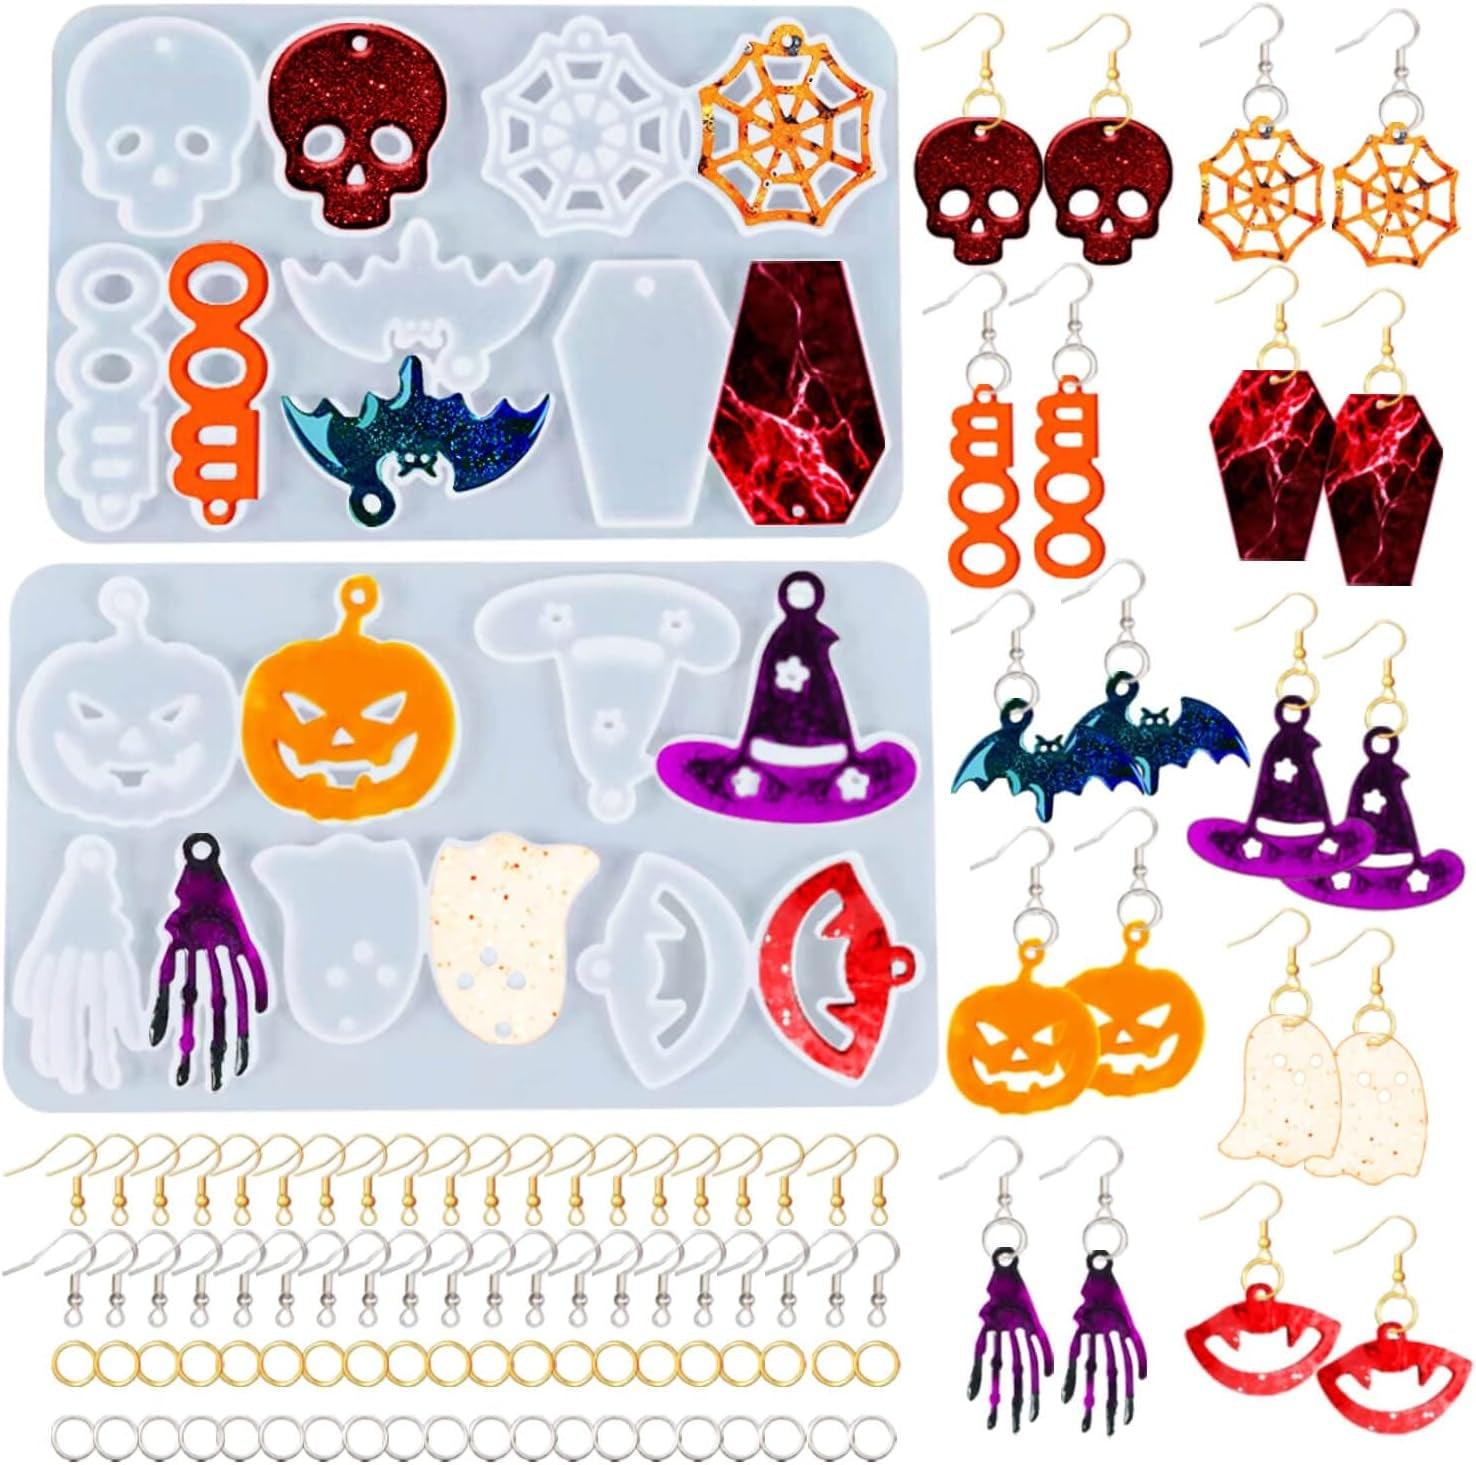 LET'S RESIN 198PCS Resin Jewelry Molds, with 8 Pairs Earring Resin